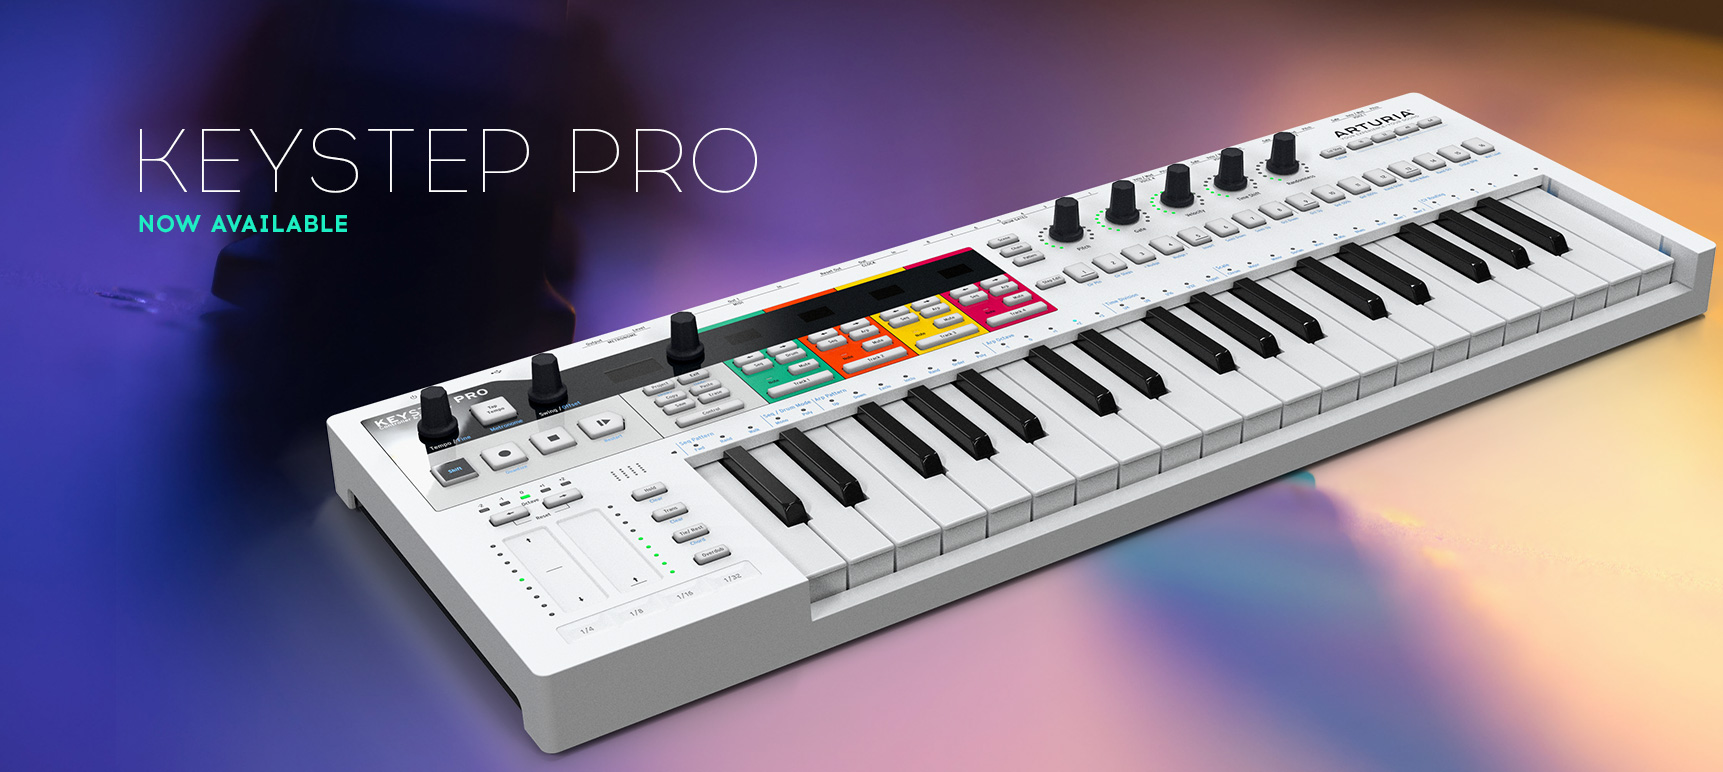 Arturia KeyStep Pro – an all-in-one sequencing solution